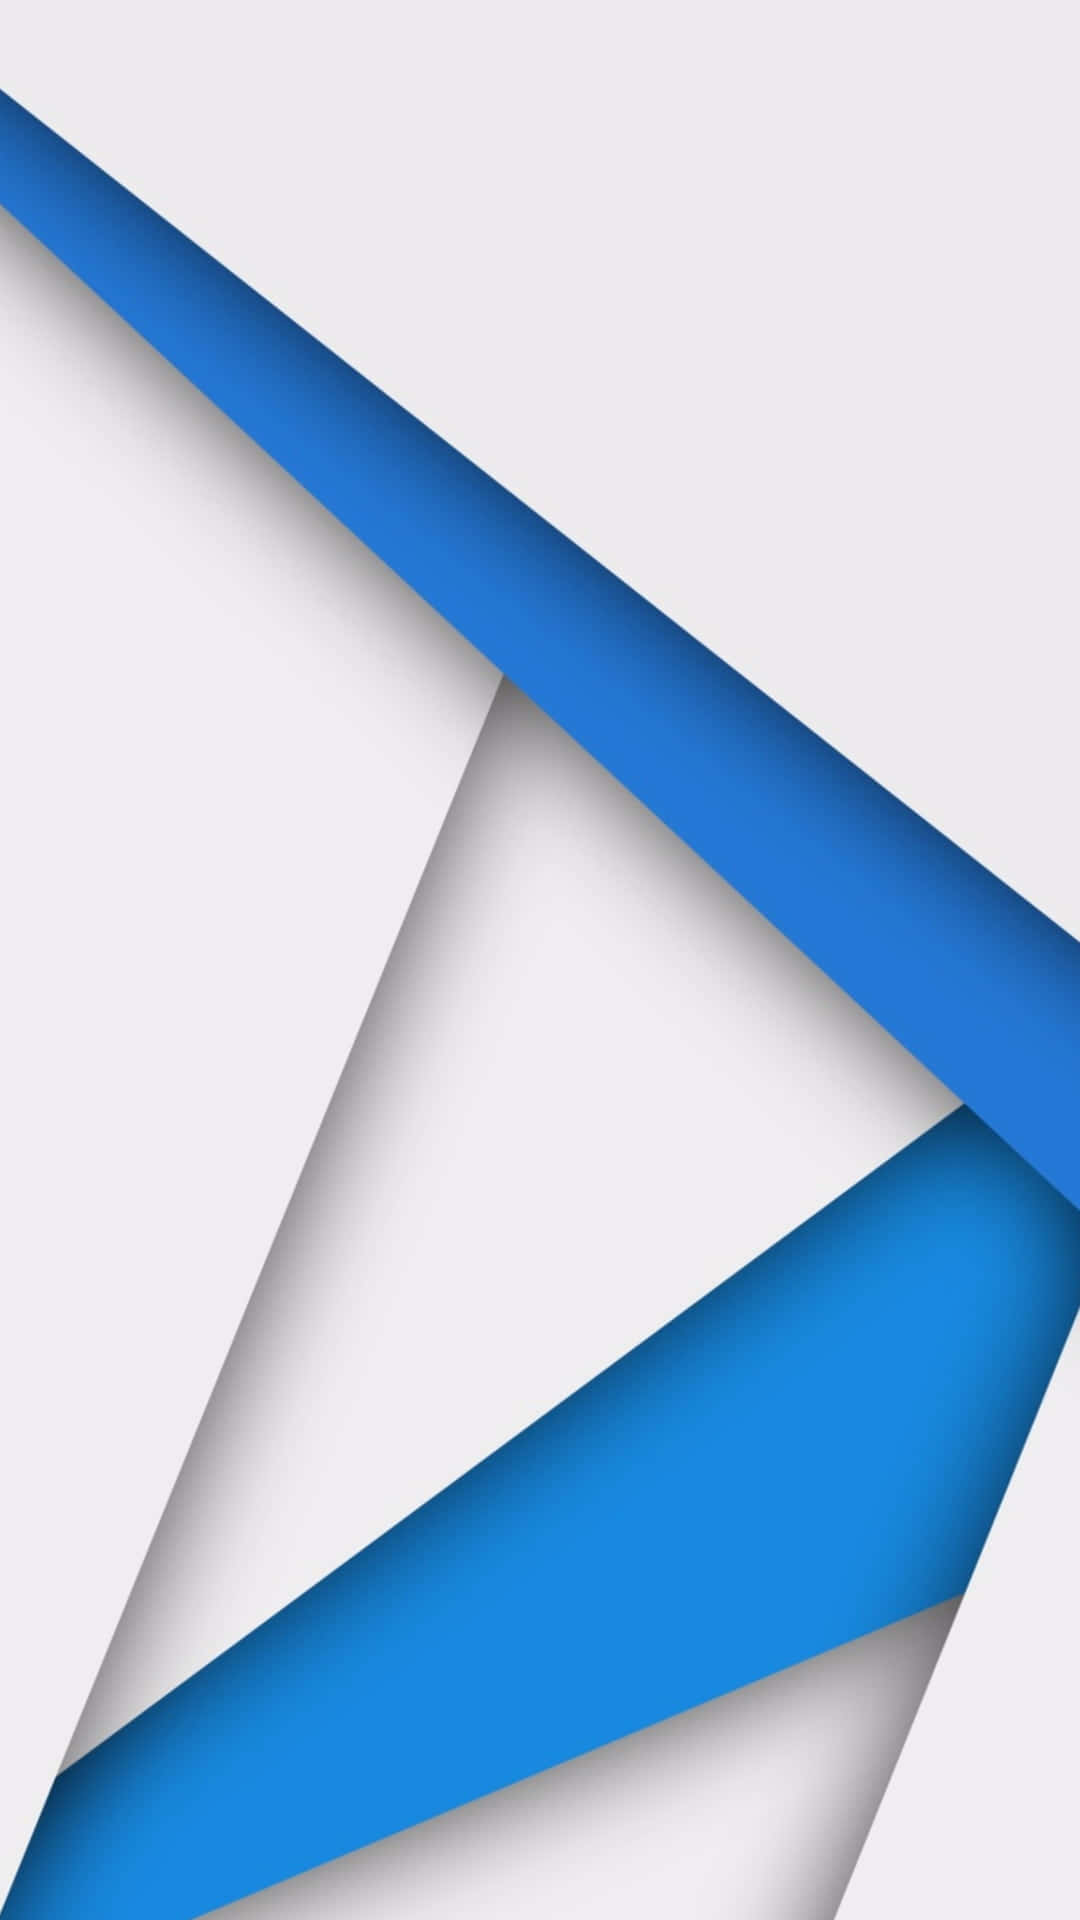 A Blue And White Paper With A Triangle On It